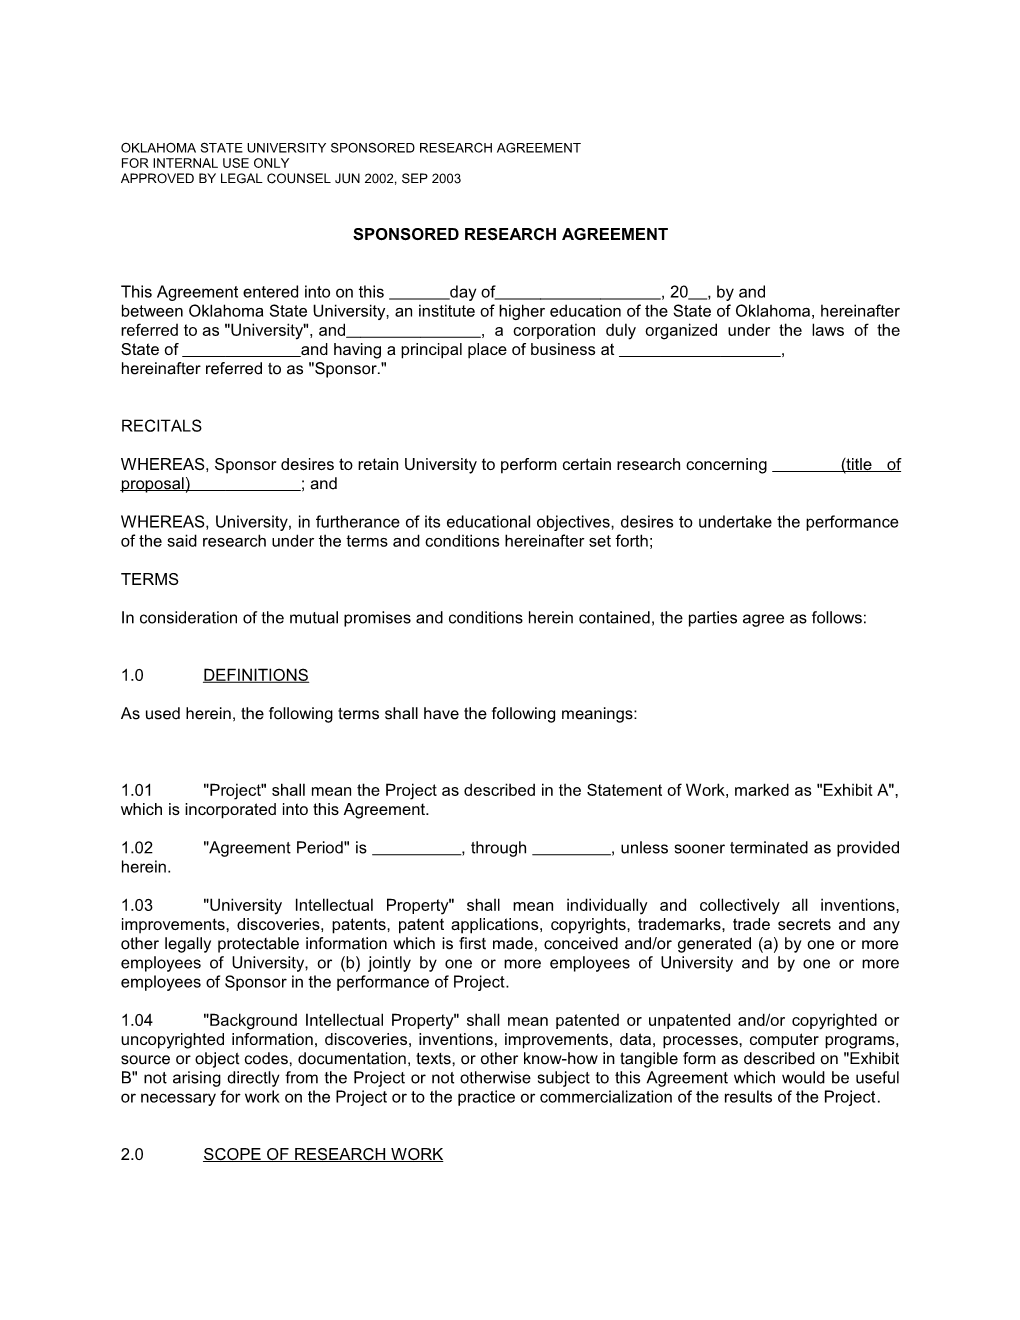 Oklahoma State University Standard Research Agreement Form